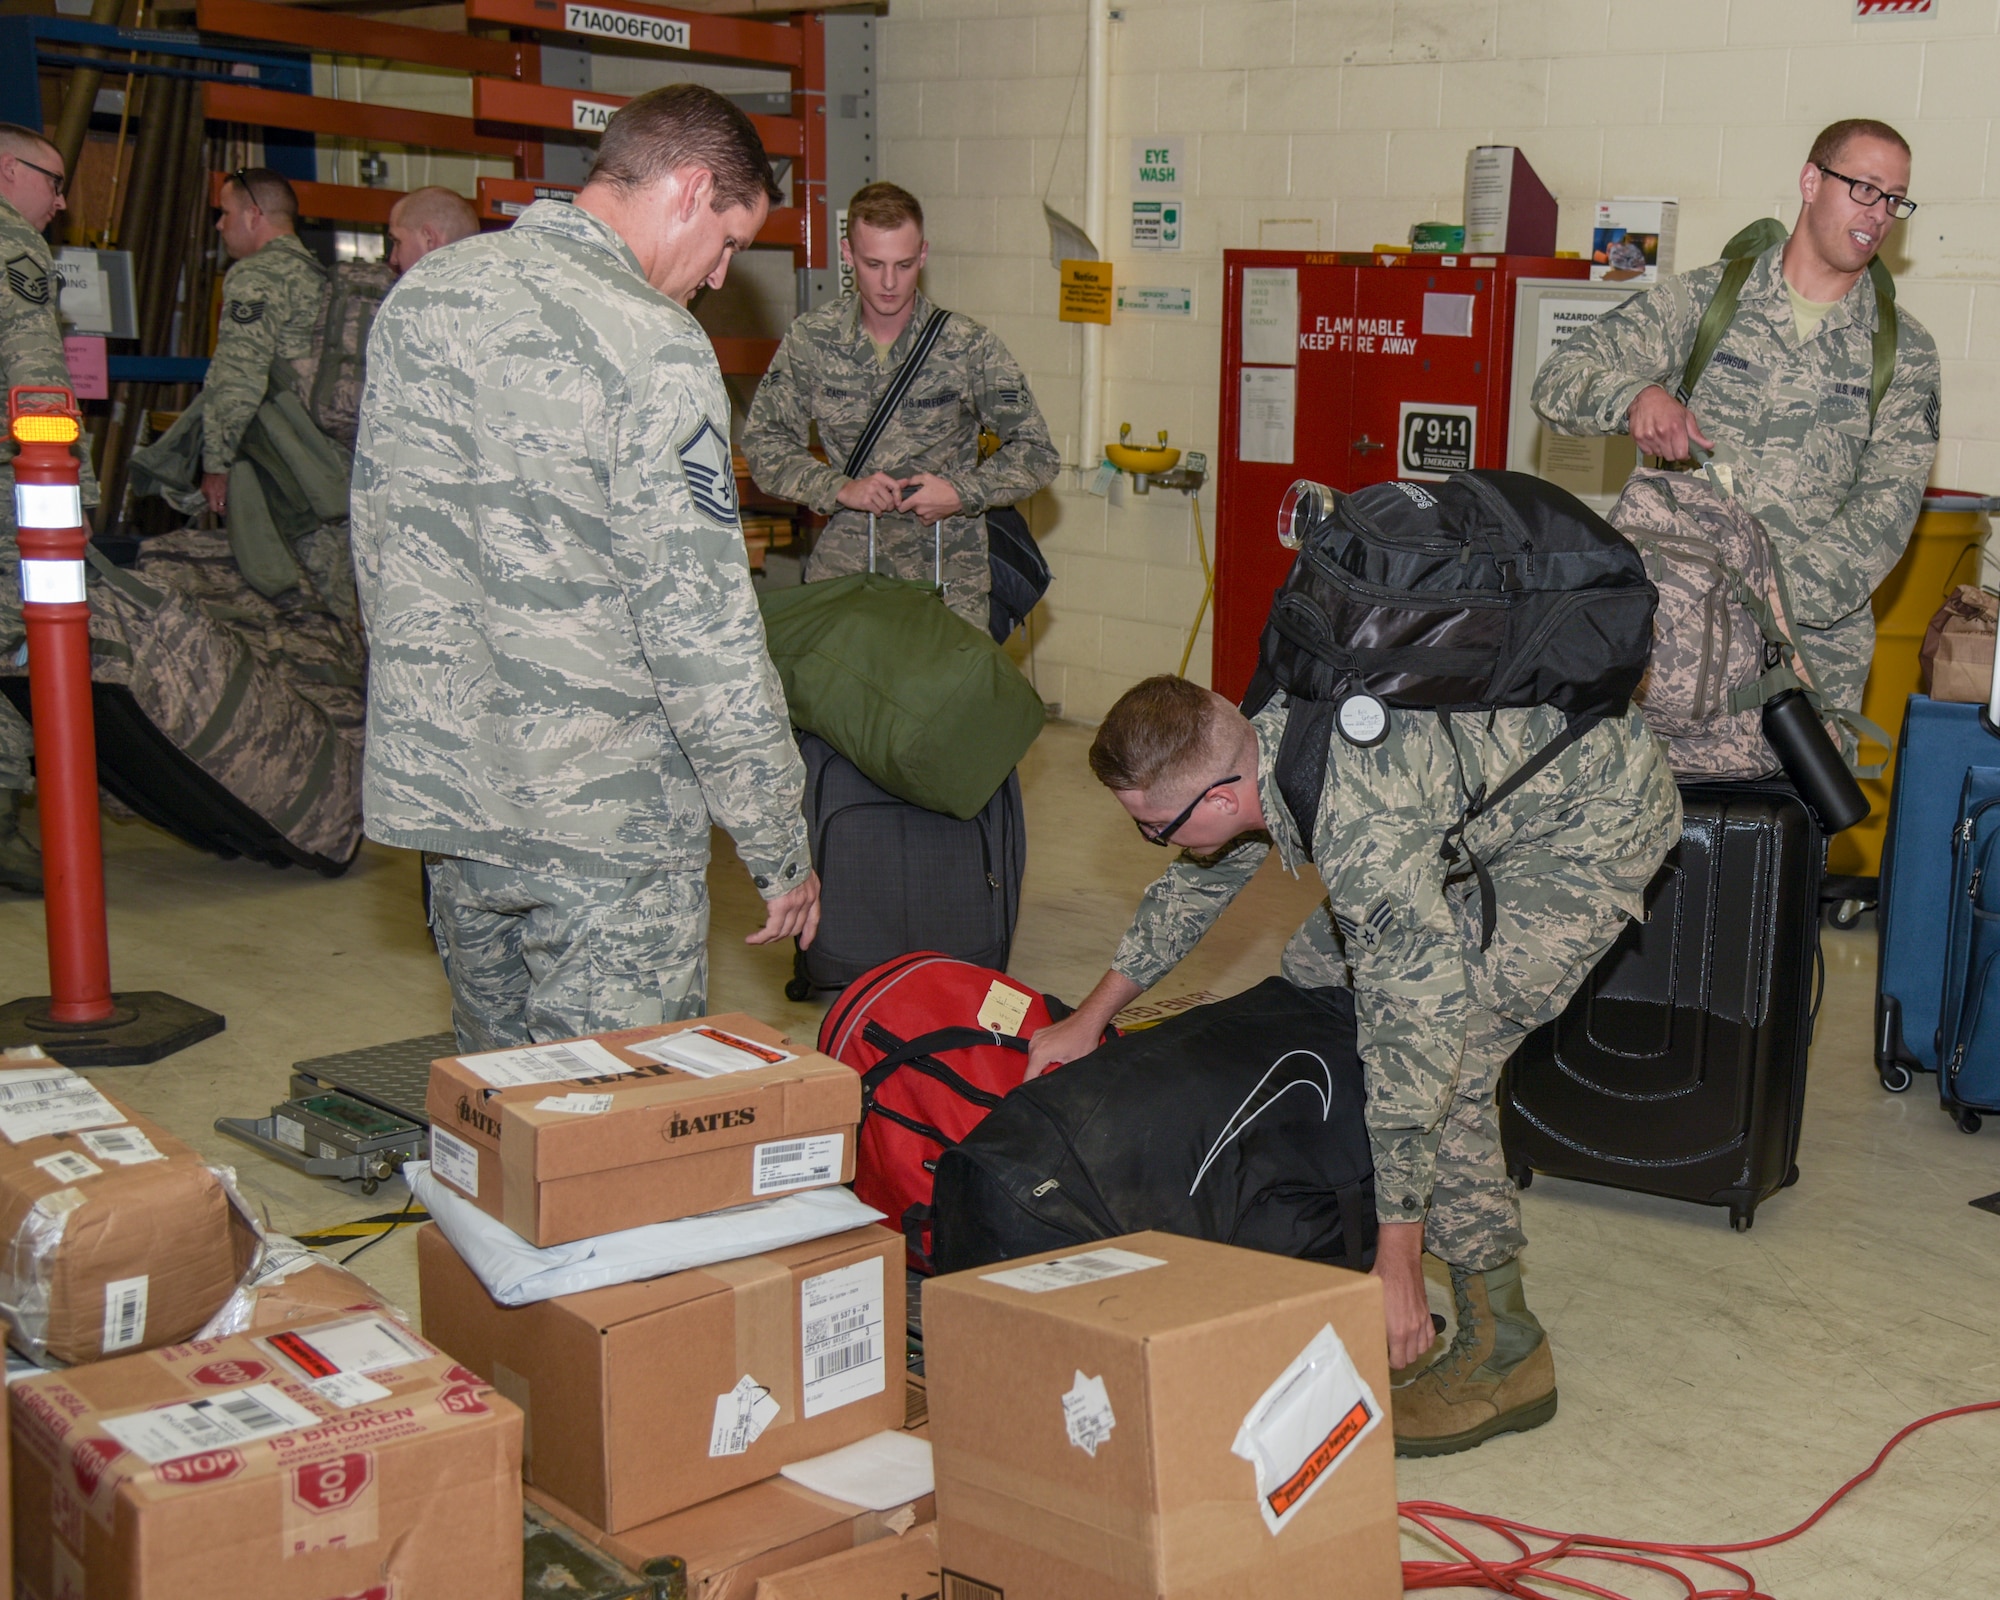 Master Sgt. RN, JTU, weighs Airmen’s bags August 29, 2018, in the deployment proccessing center at the 115th Fighter Wing, Truax Field, Wisconsin. Approximately 30 Airmen with the 115th Force Support Squadron are going TDY to Ramstein Air Base, Germany.(U.S. Air National Guard photo by Airman 1st Class Cameron Lewis)